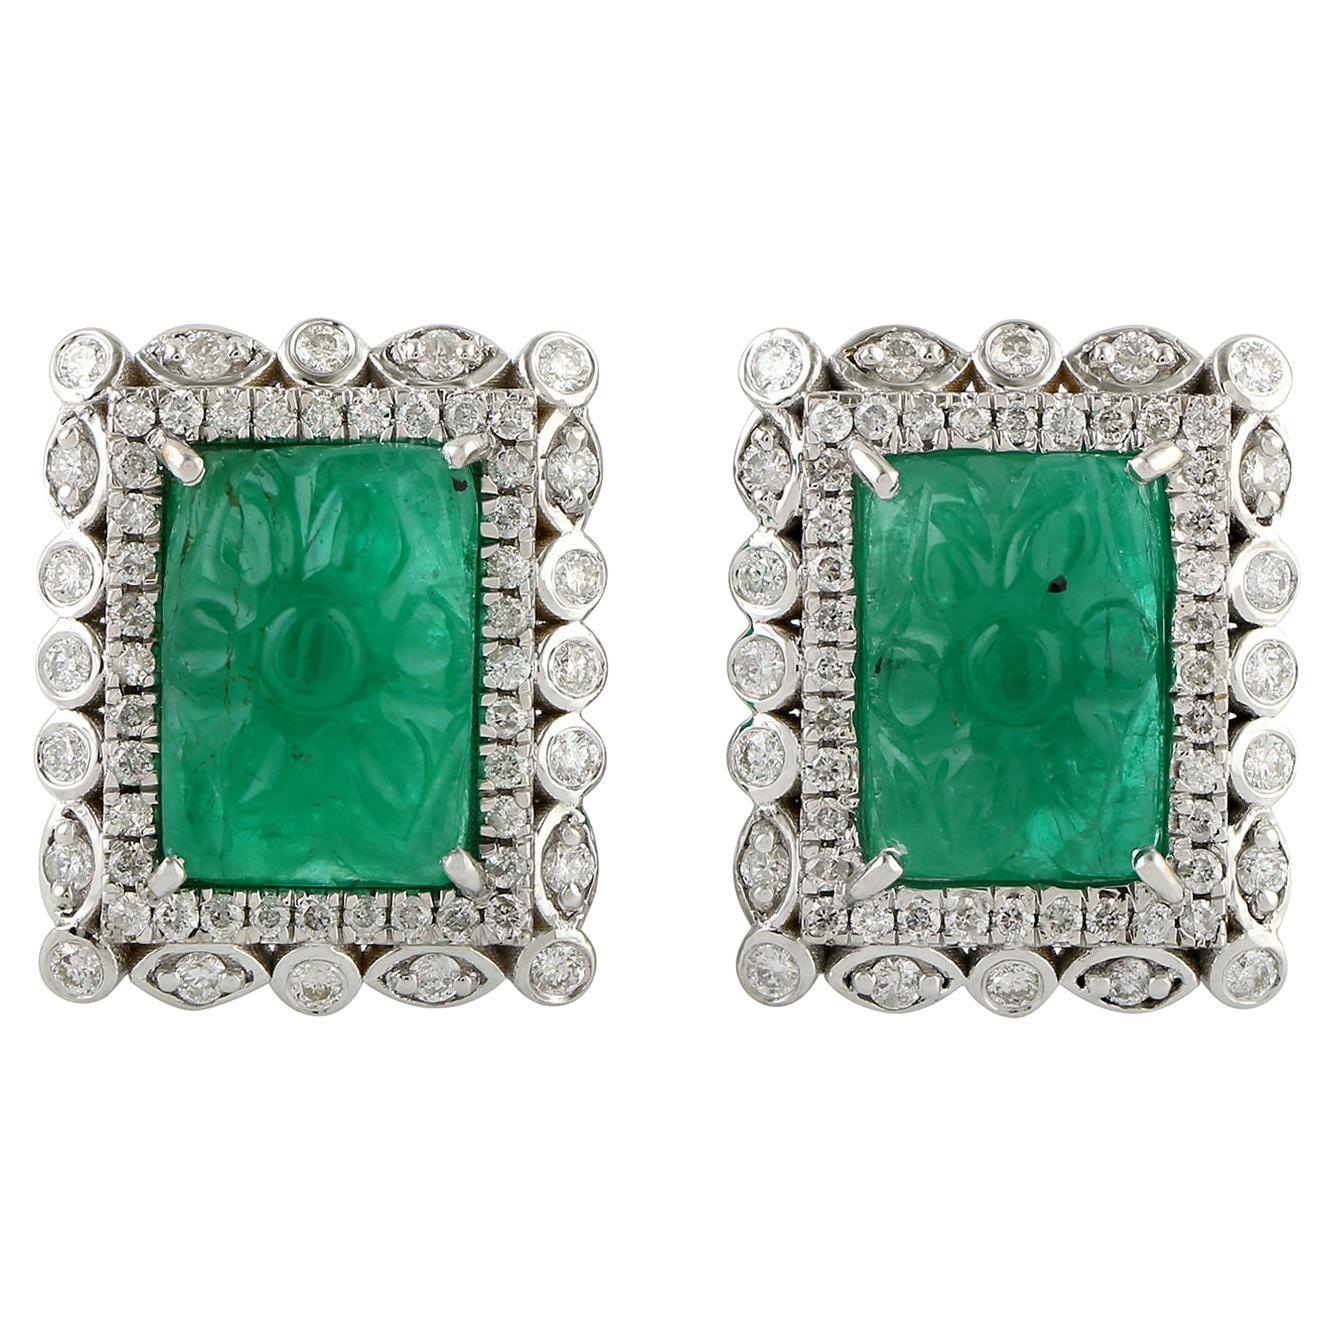 6.72ct Carved Emerald Studs With Diamonds Made In 18k White Gold